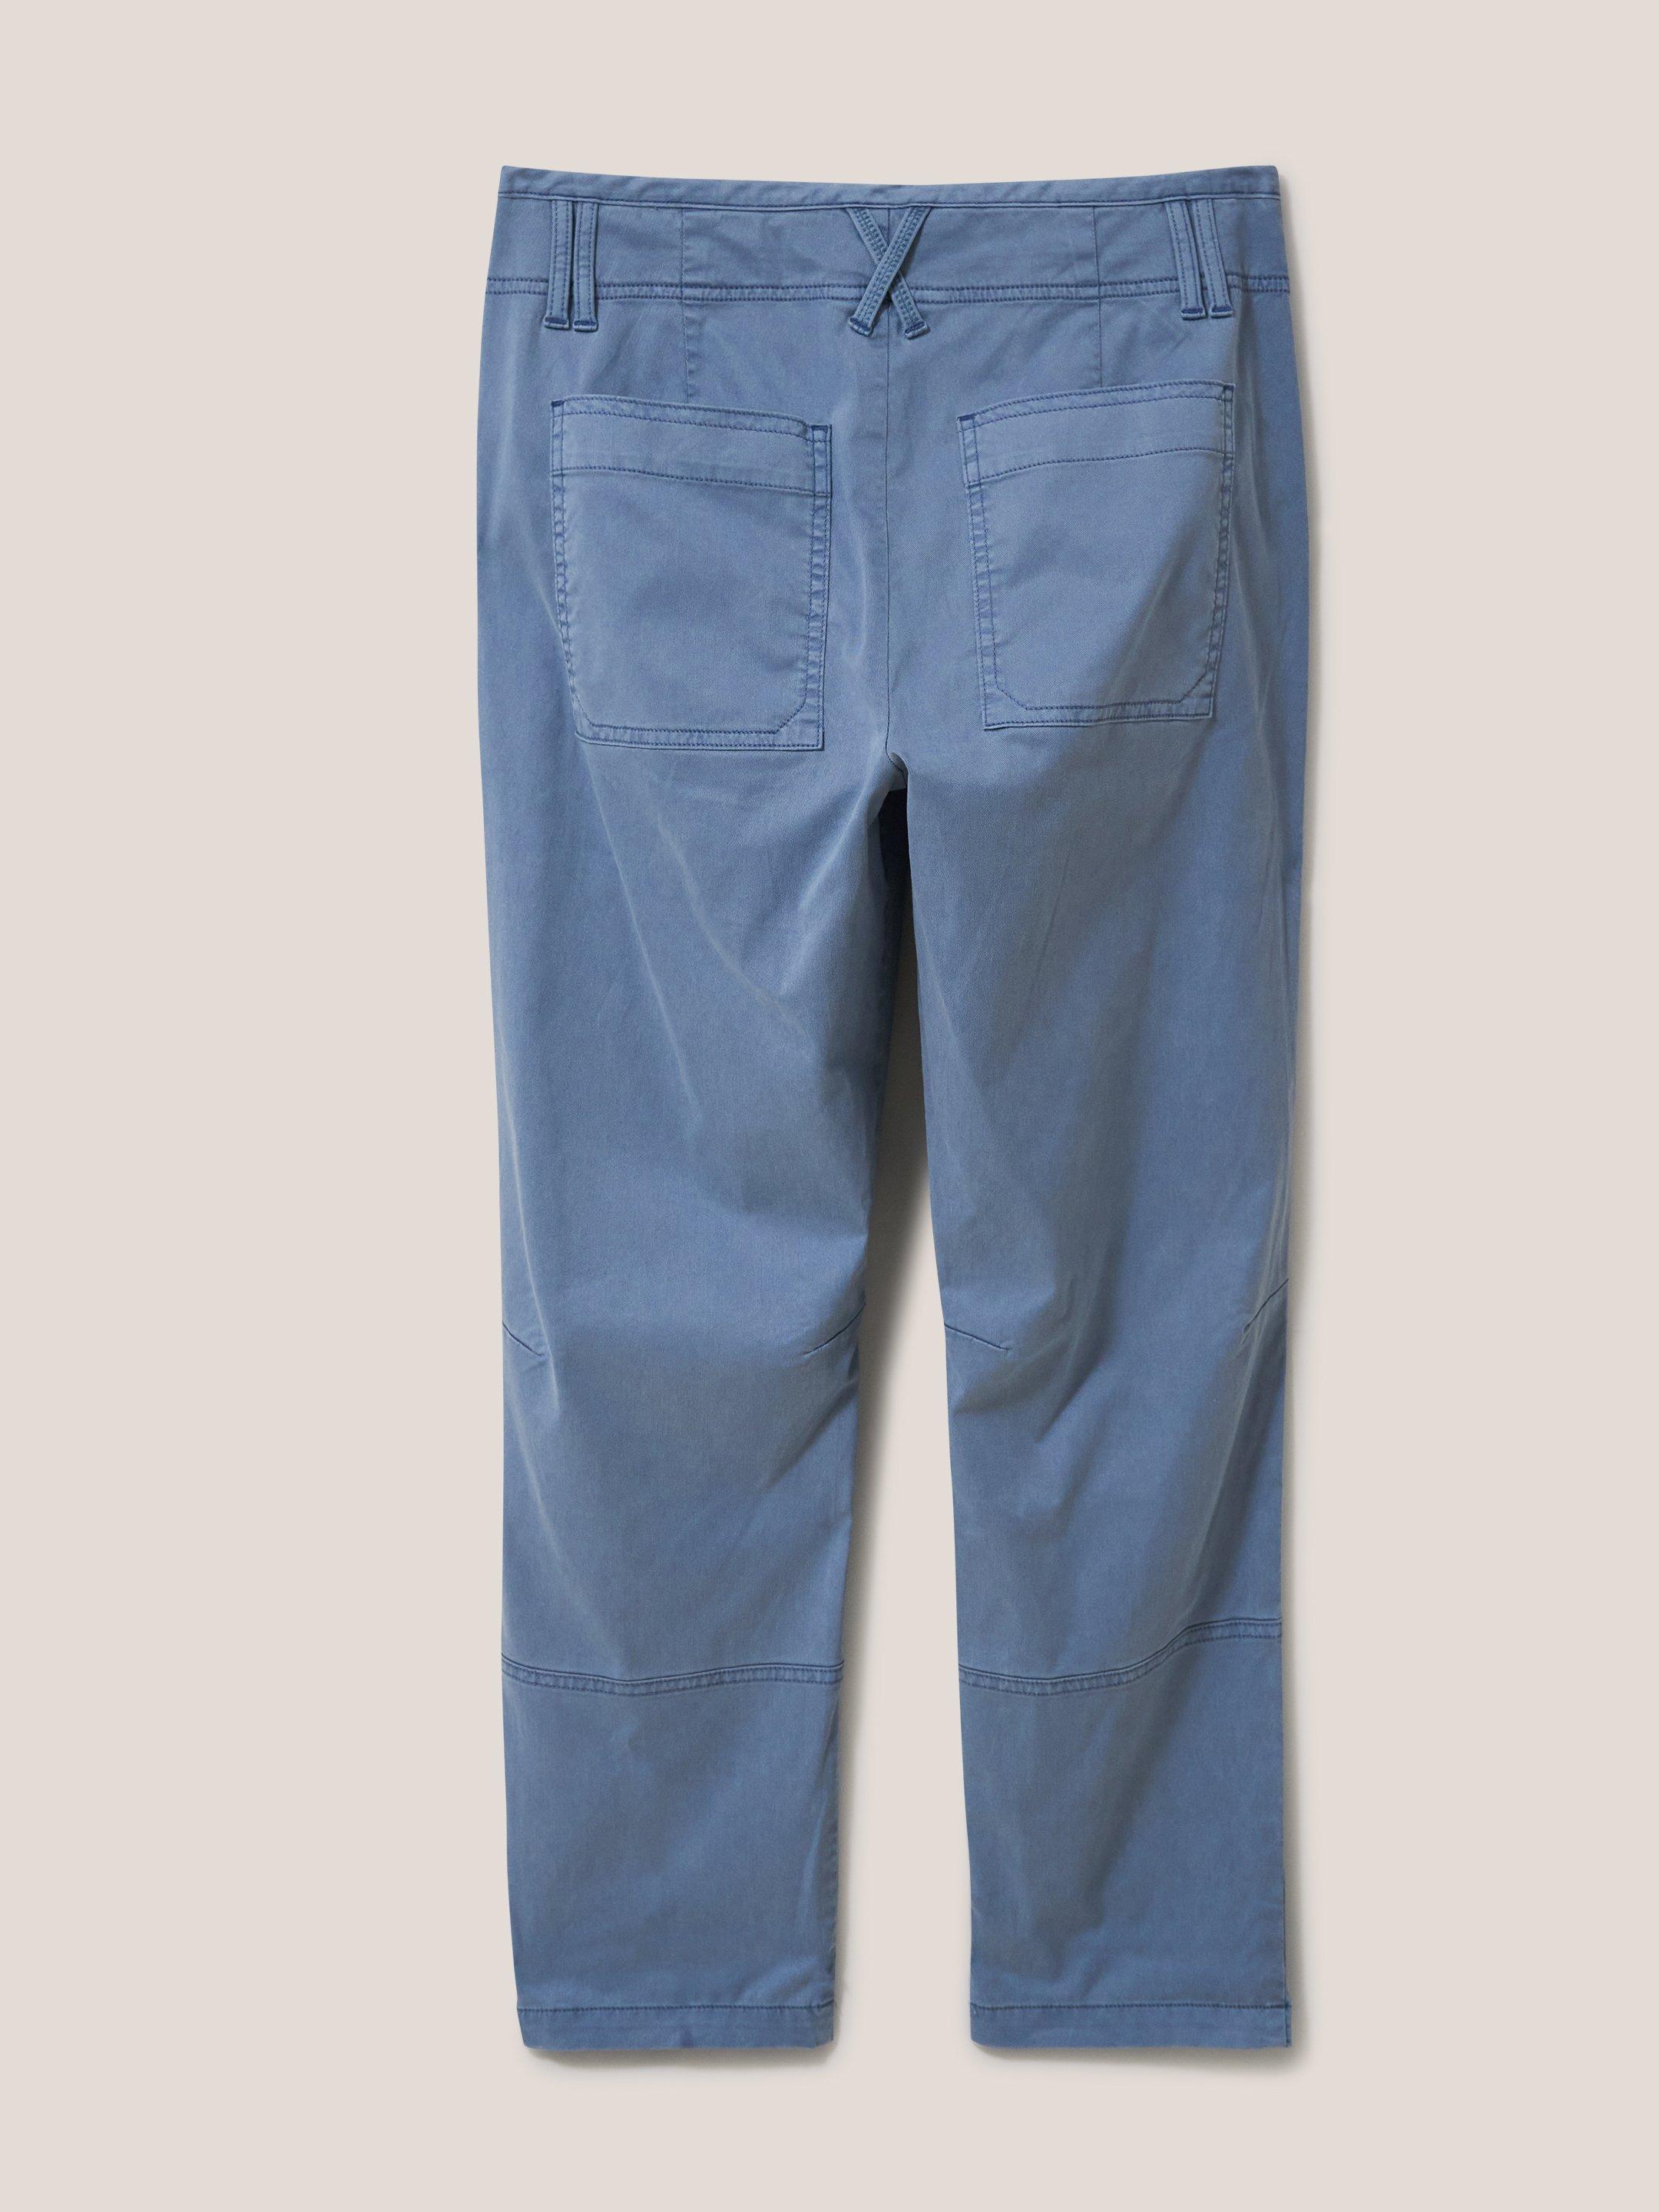 Blaire Trouser in LGT BLUE - FLAT BACK